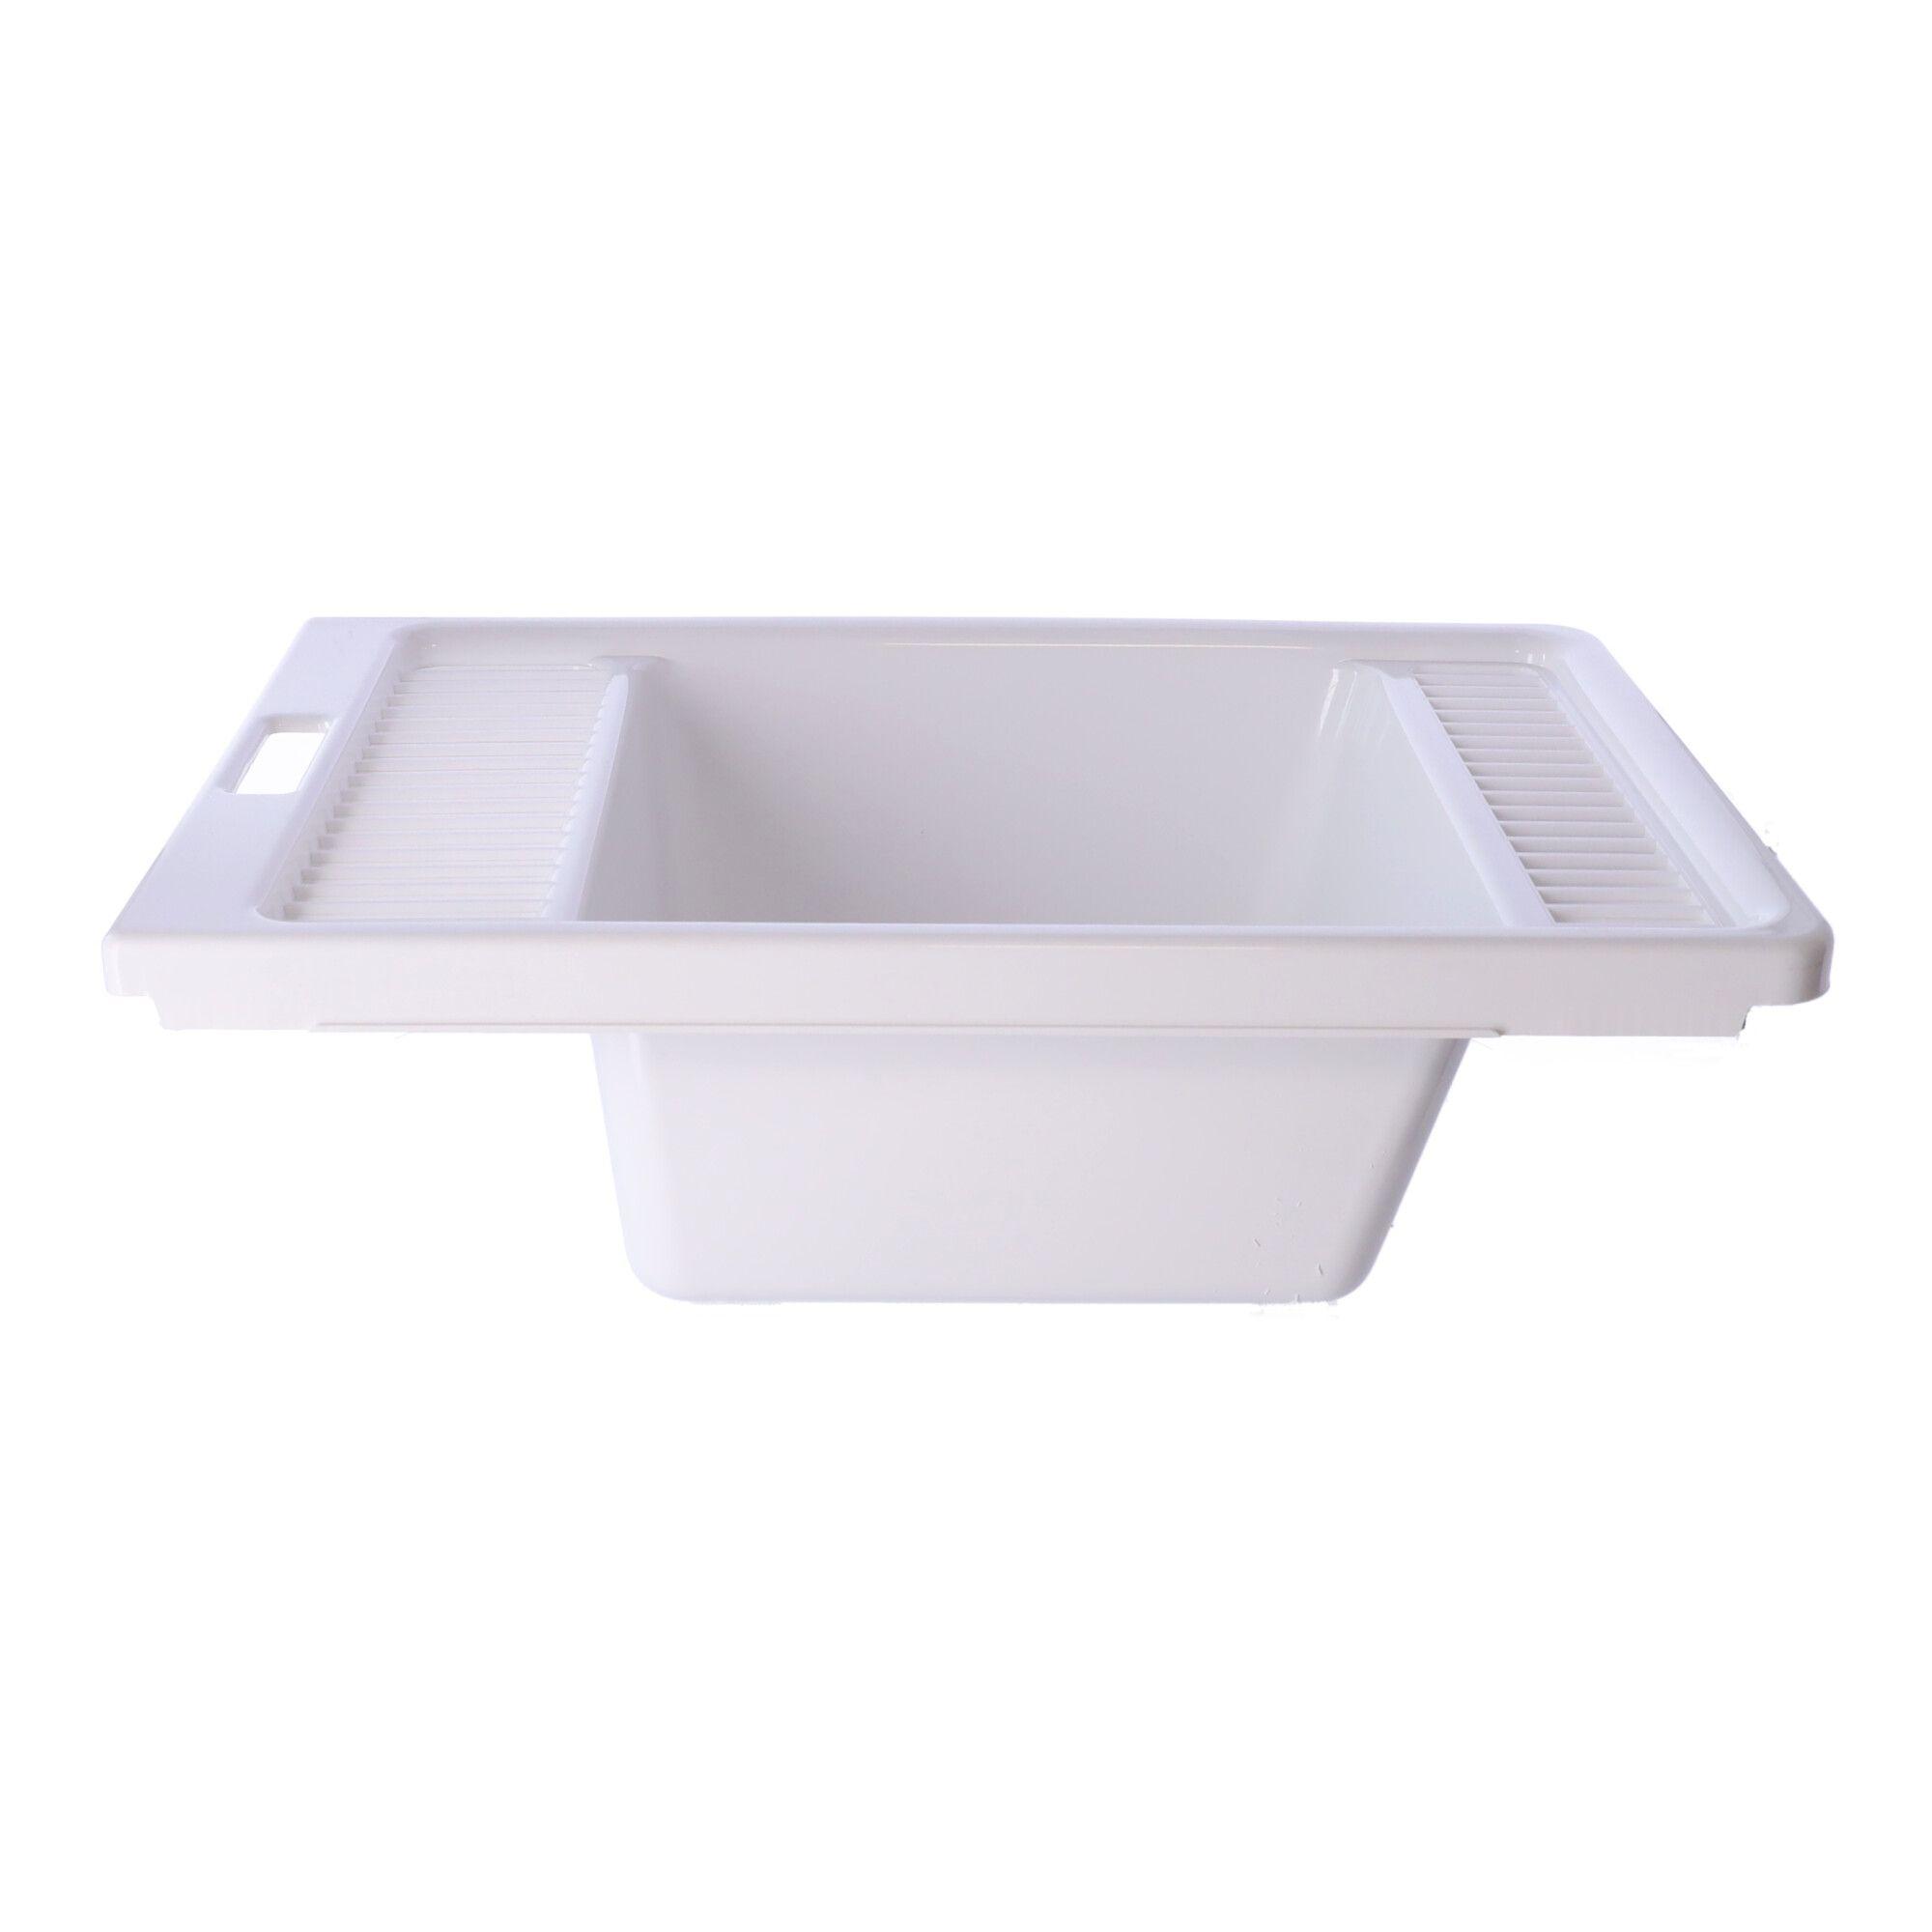 Bath bowl with stopper, POLISH PRODUCT - white